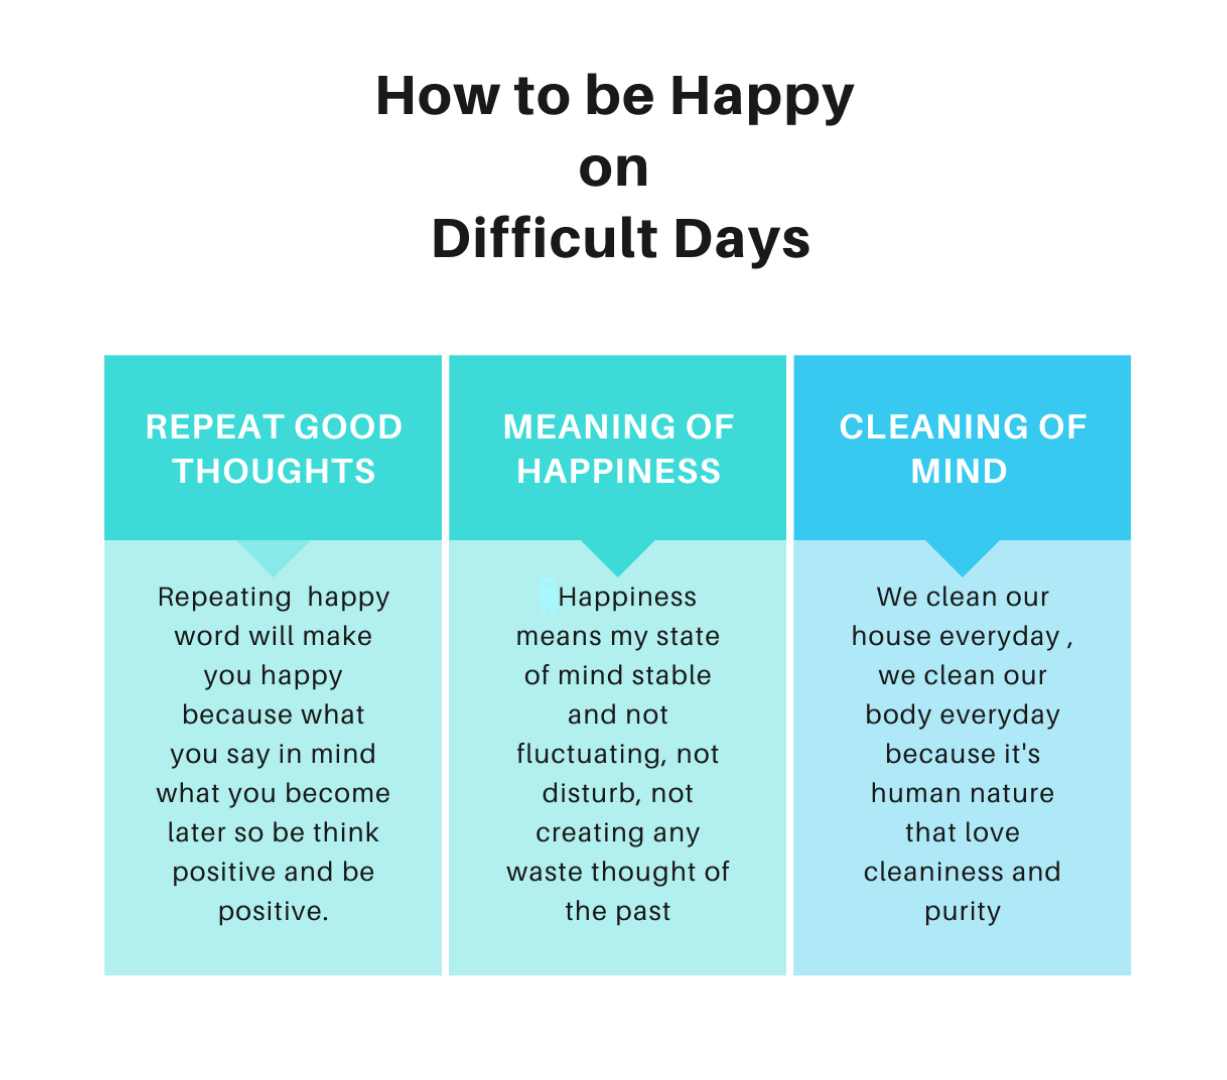 How to be Happy on Difficult Days